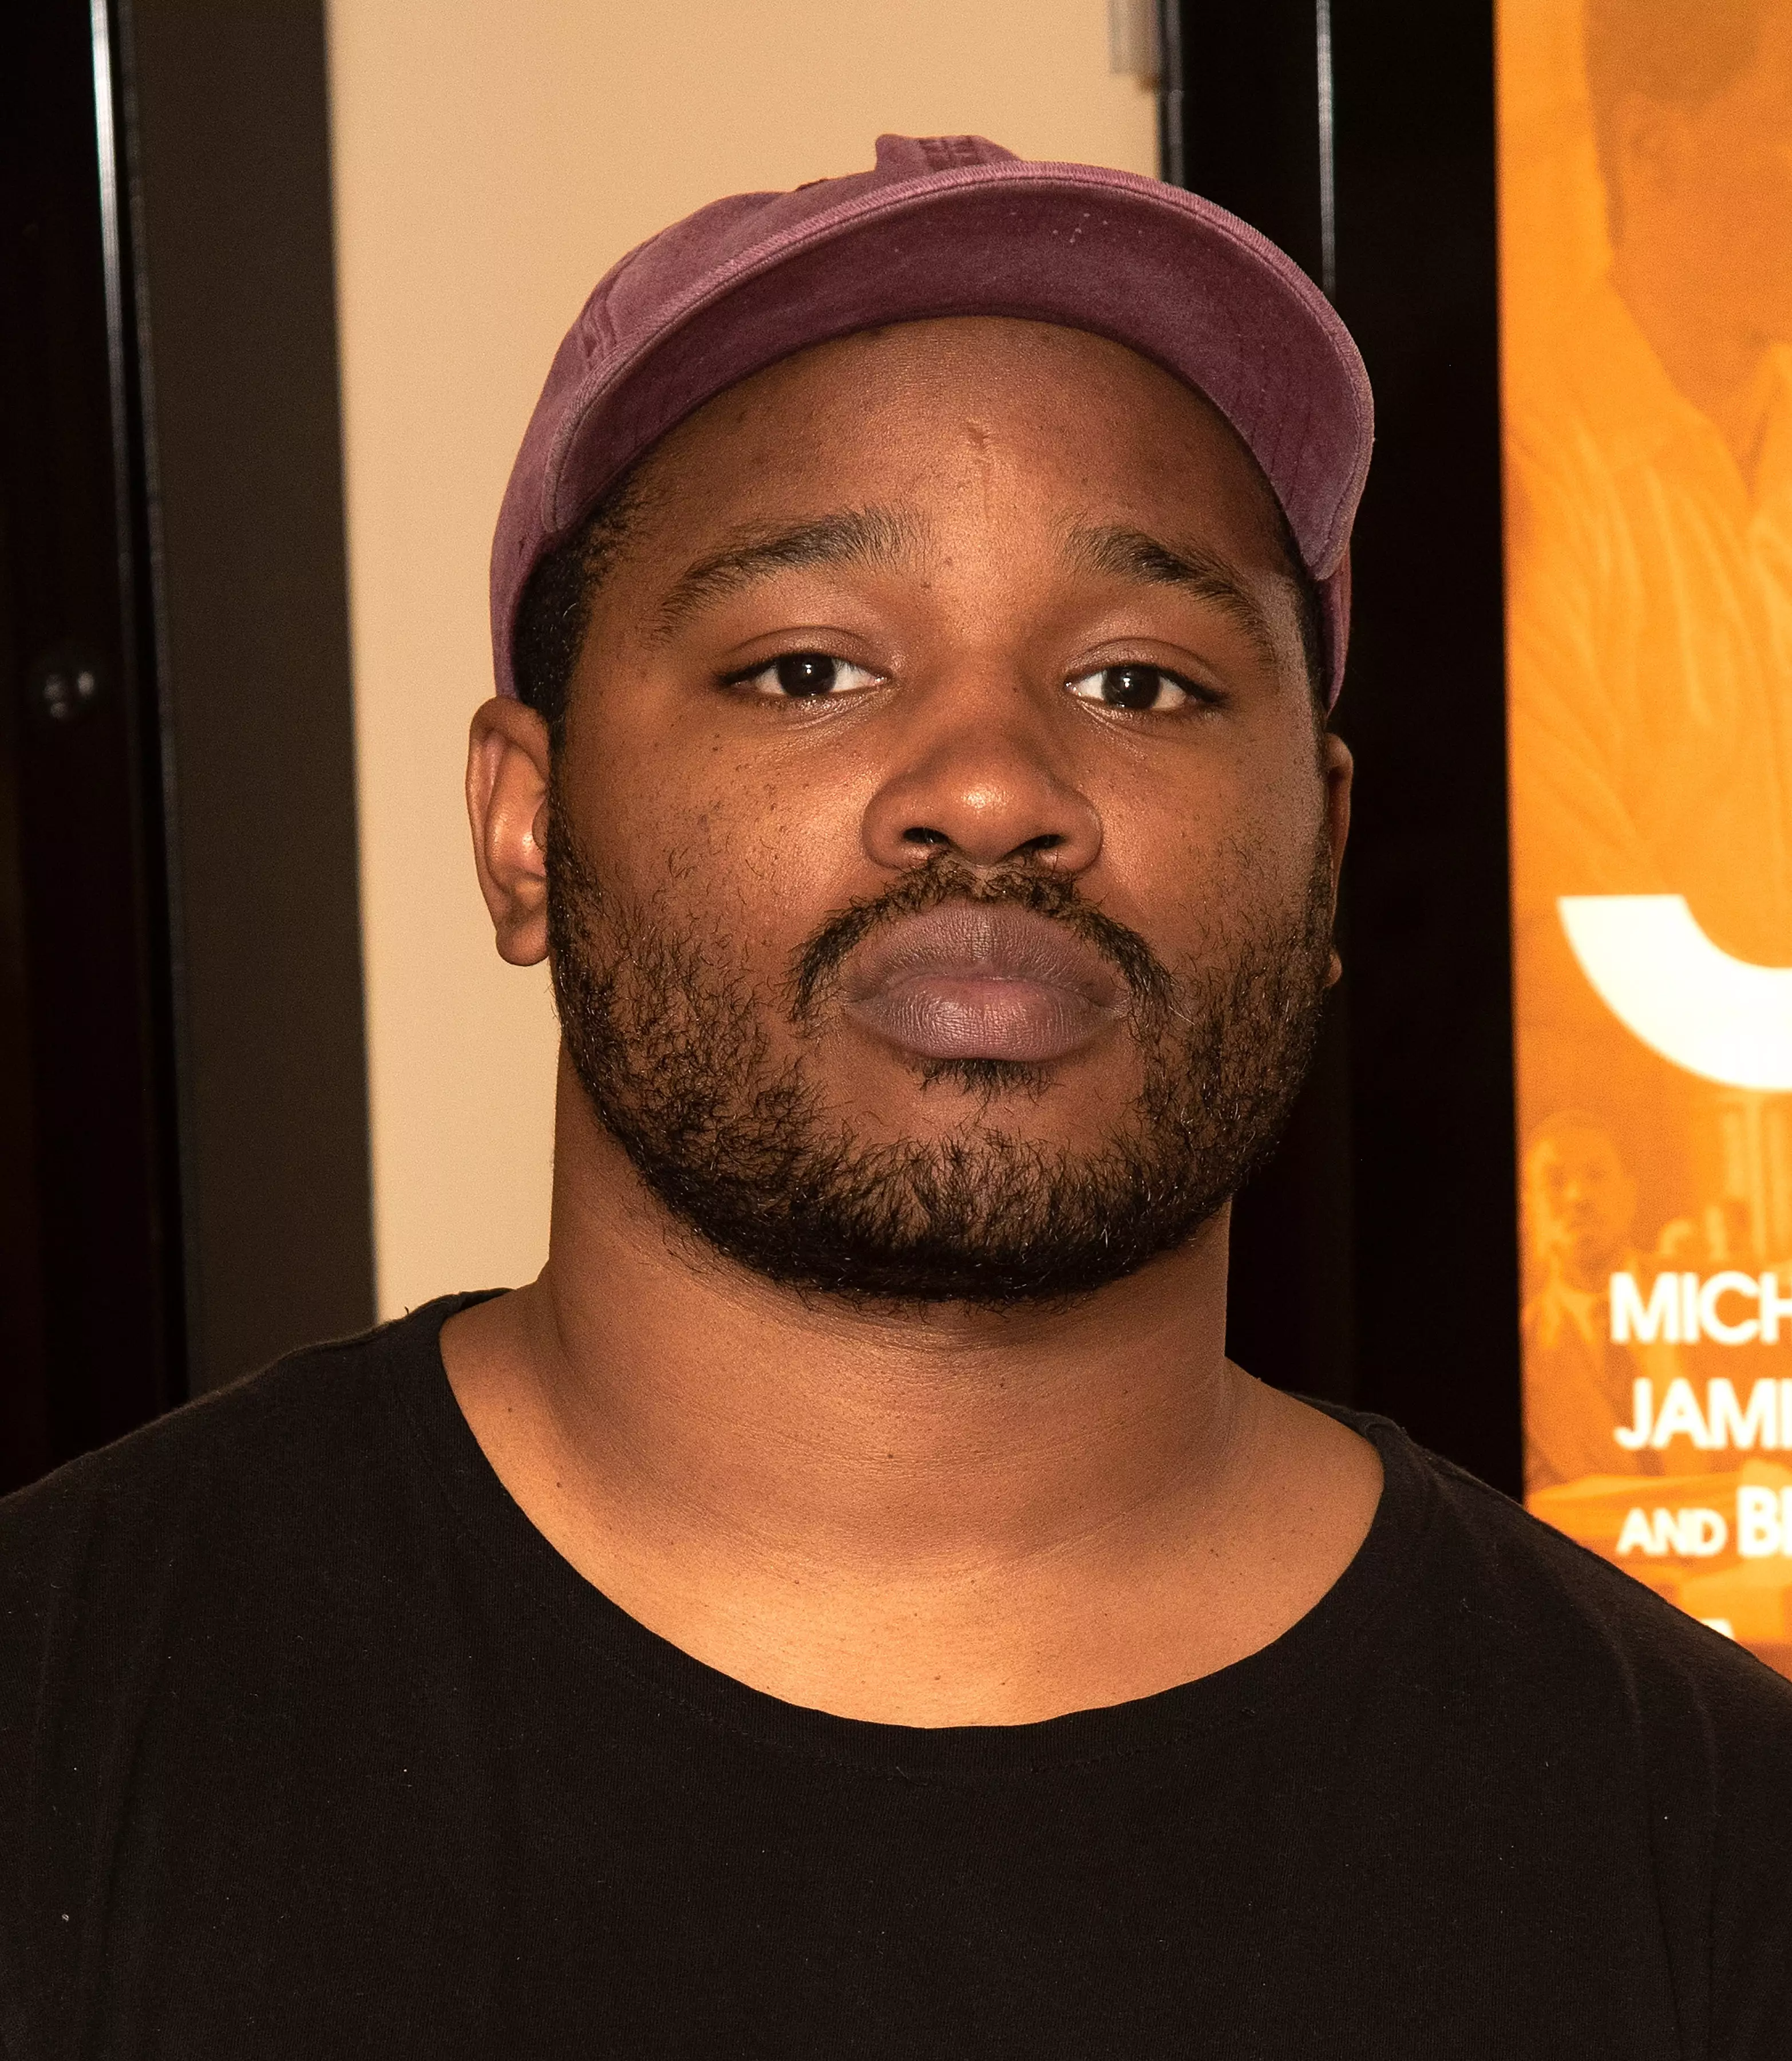 Ryan Coogler has signed up to direct the series.